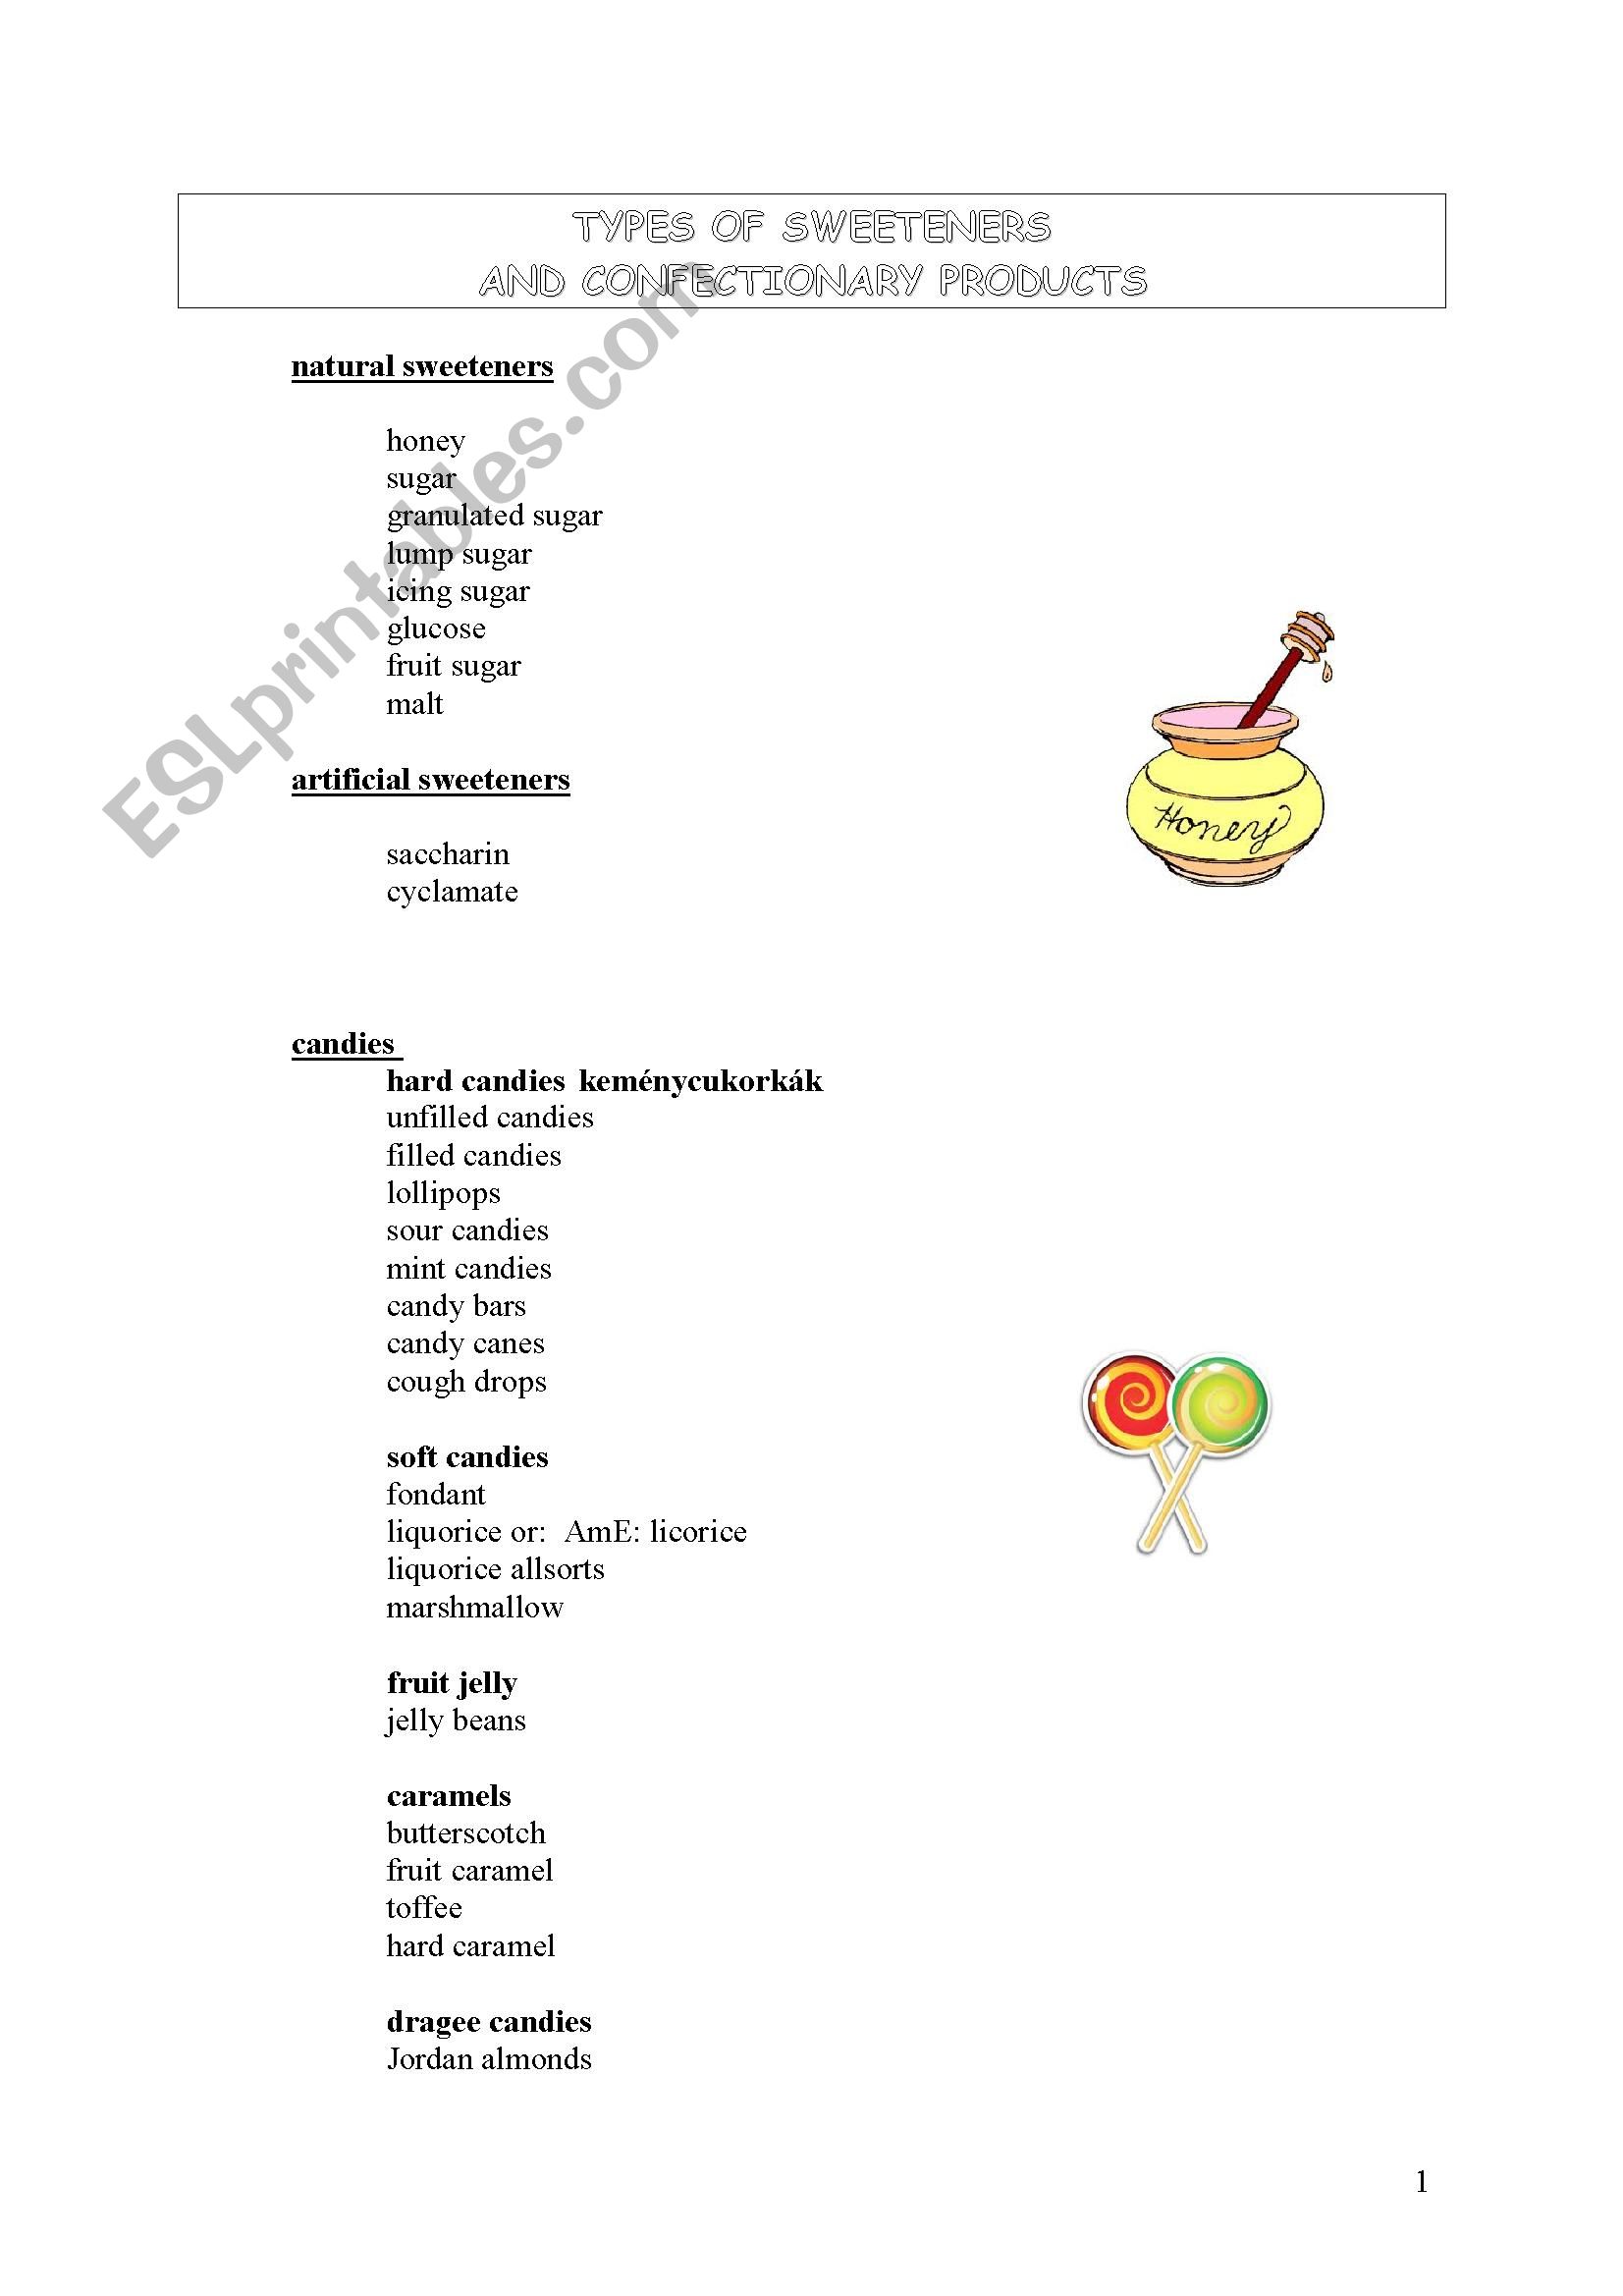 Sweeteners and sweets worksheet